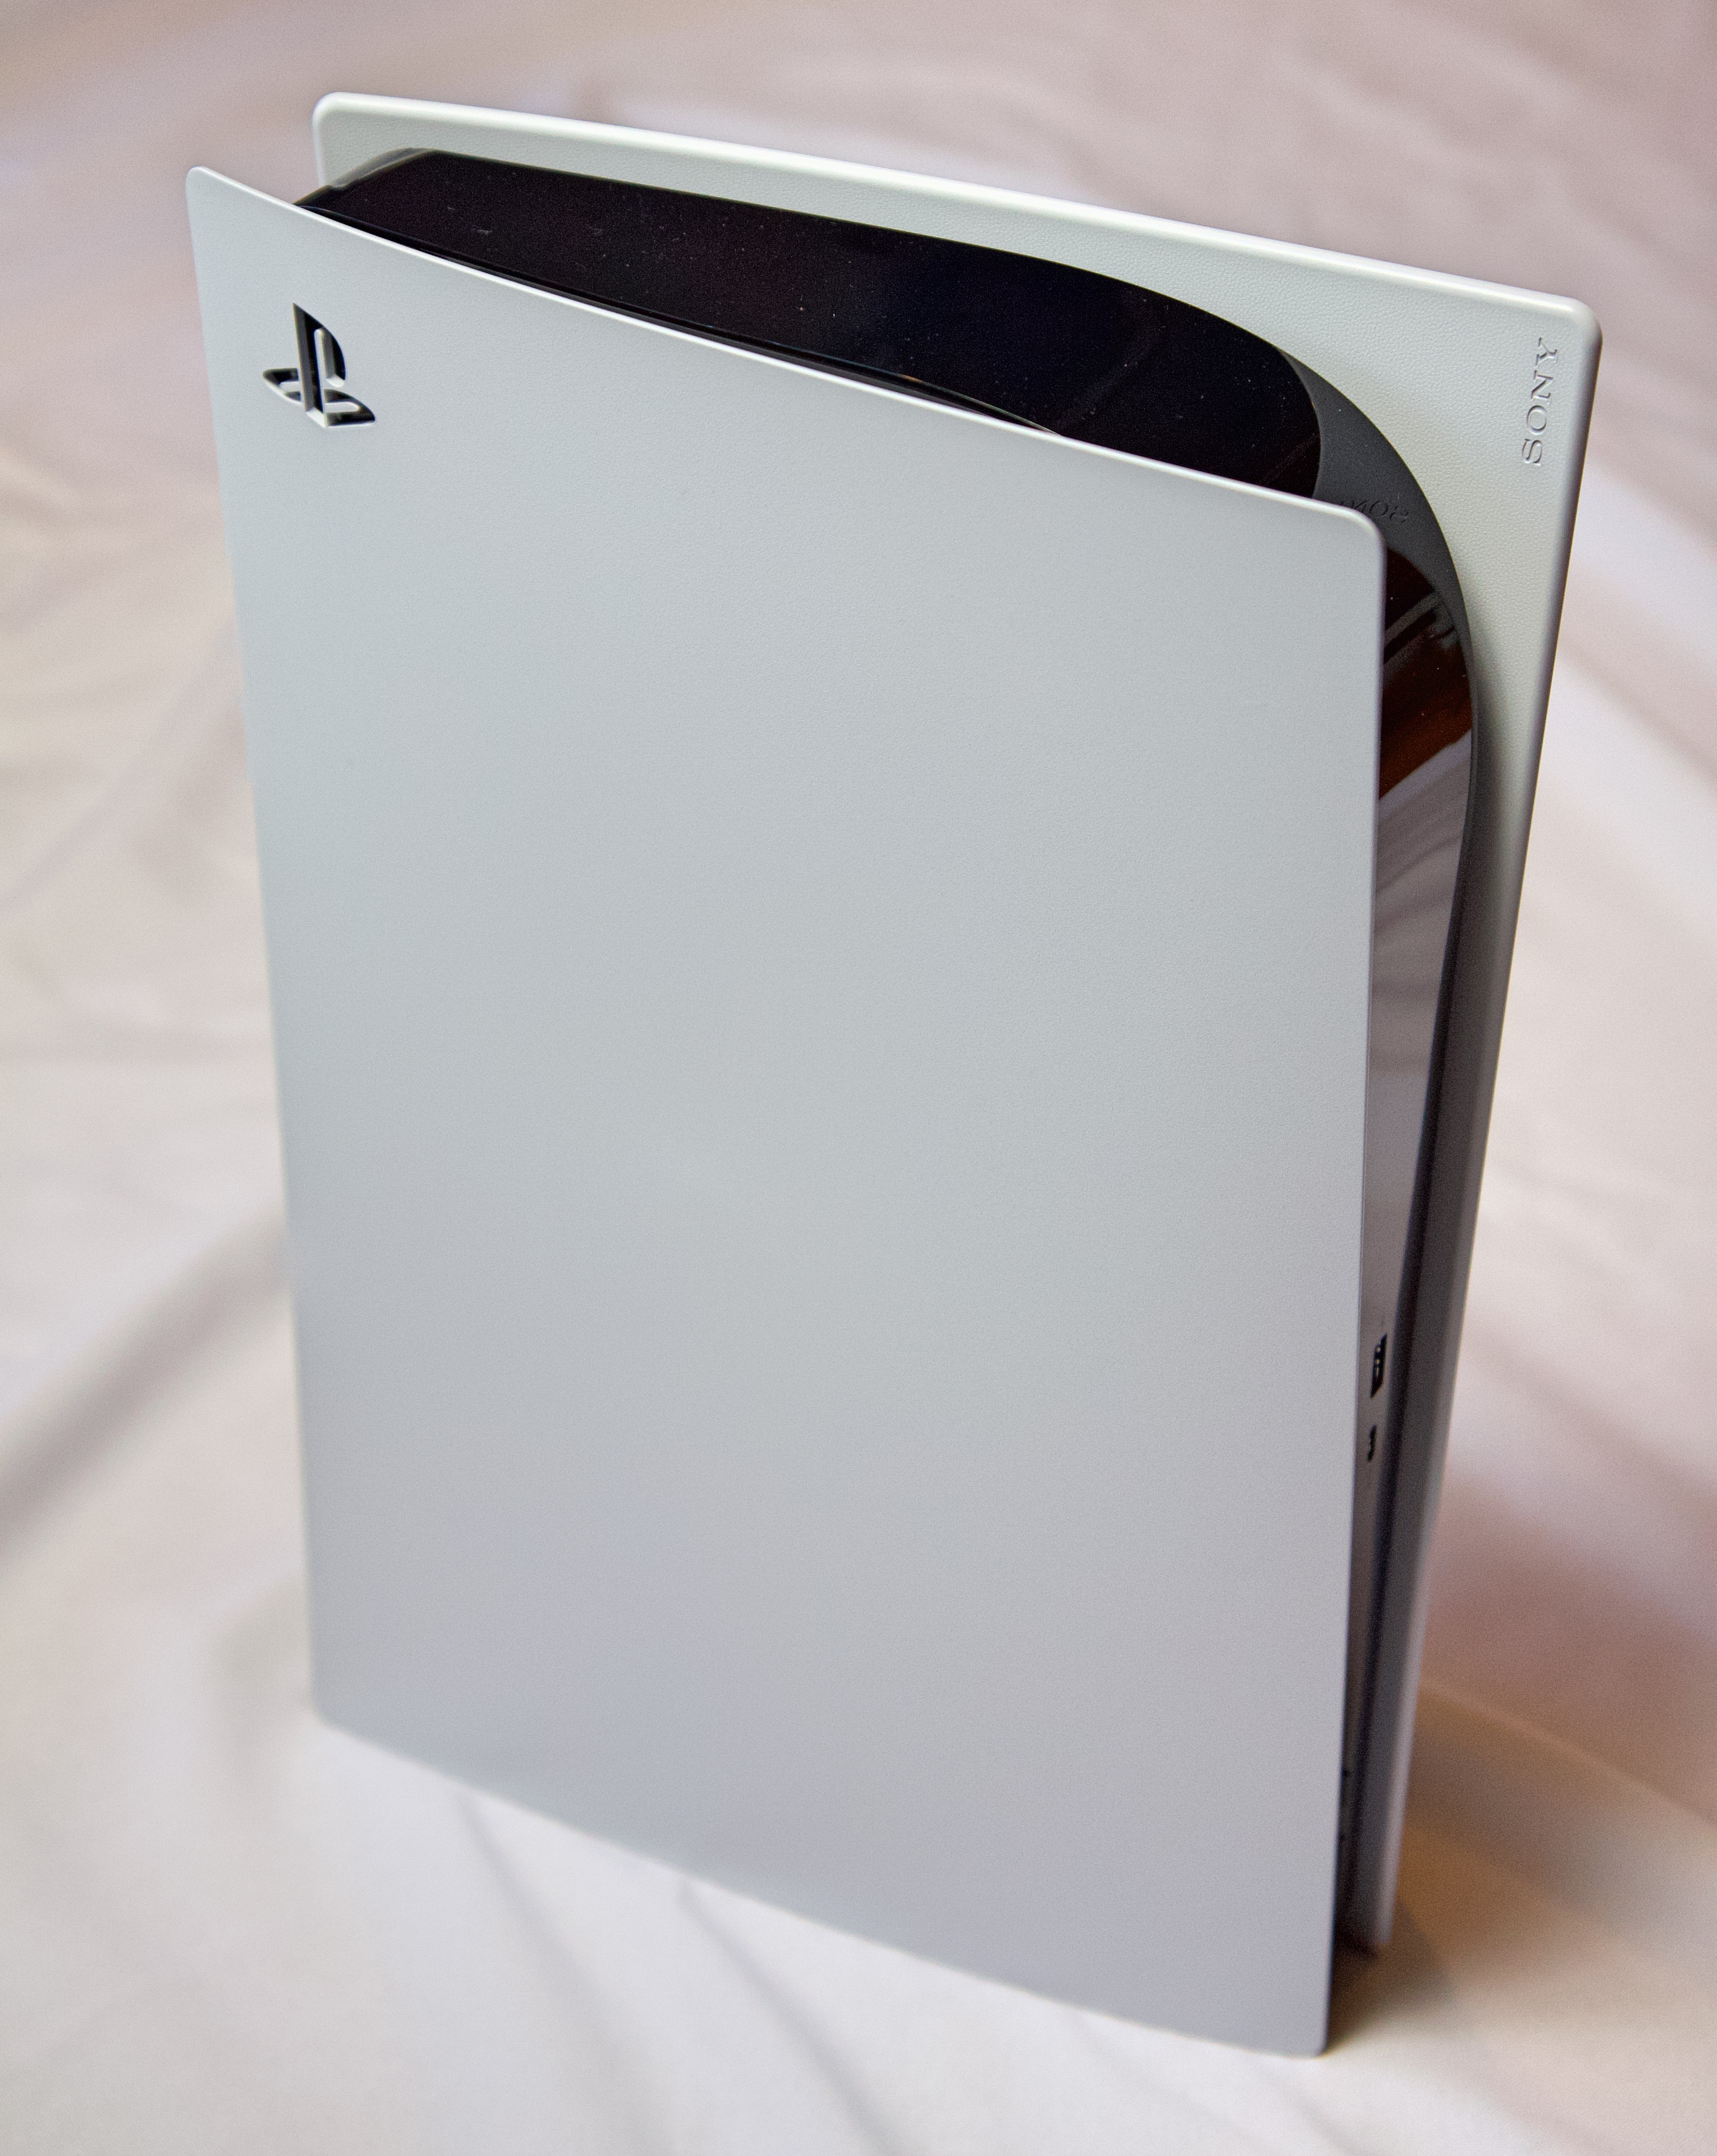 PS5 unboxing: Sony's big, curvy boy stands out in any room